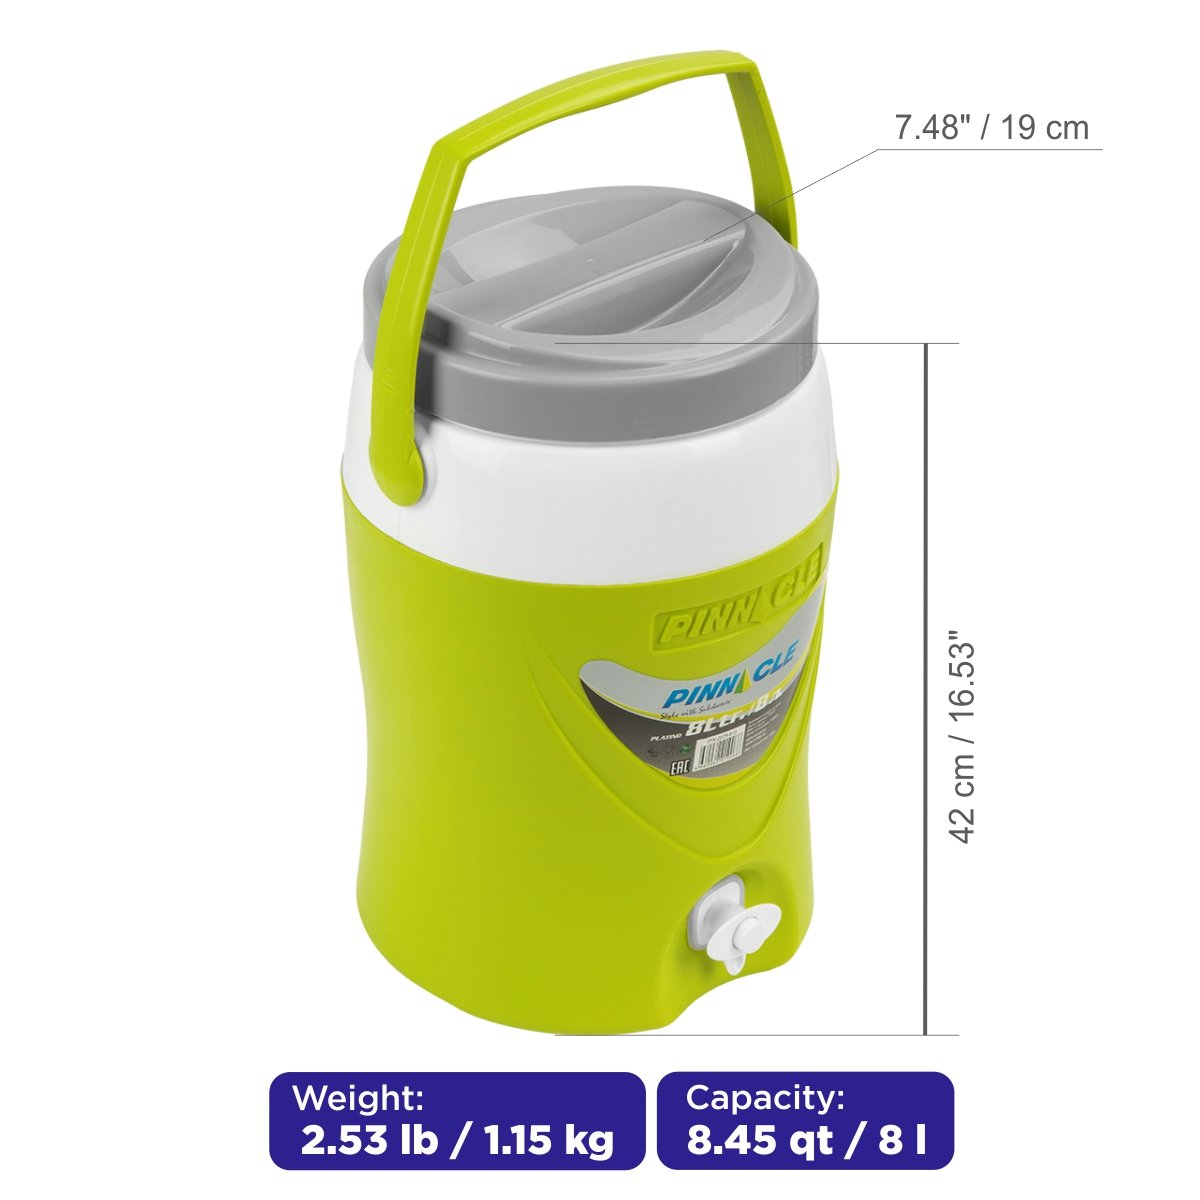 Platino Beverage Cooler Jug with Spigot for Picnics, Camping, 8 qt is 8 quart capable, weighing on;y 2.5 lbs. 16.5 inches high, 7.5 inches wide.